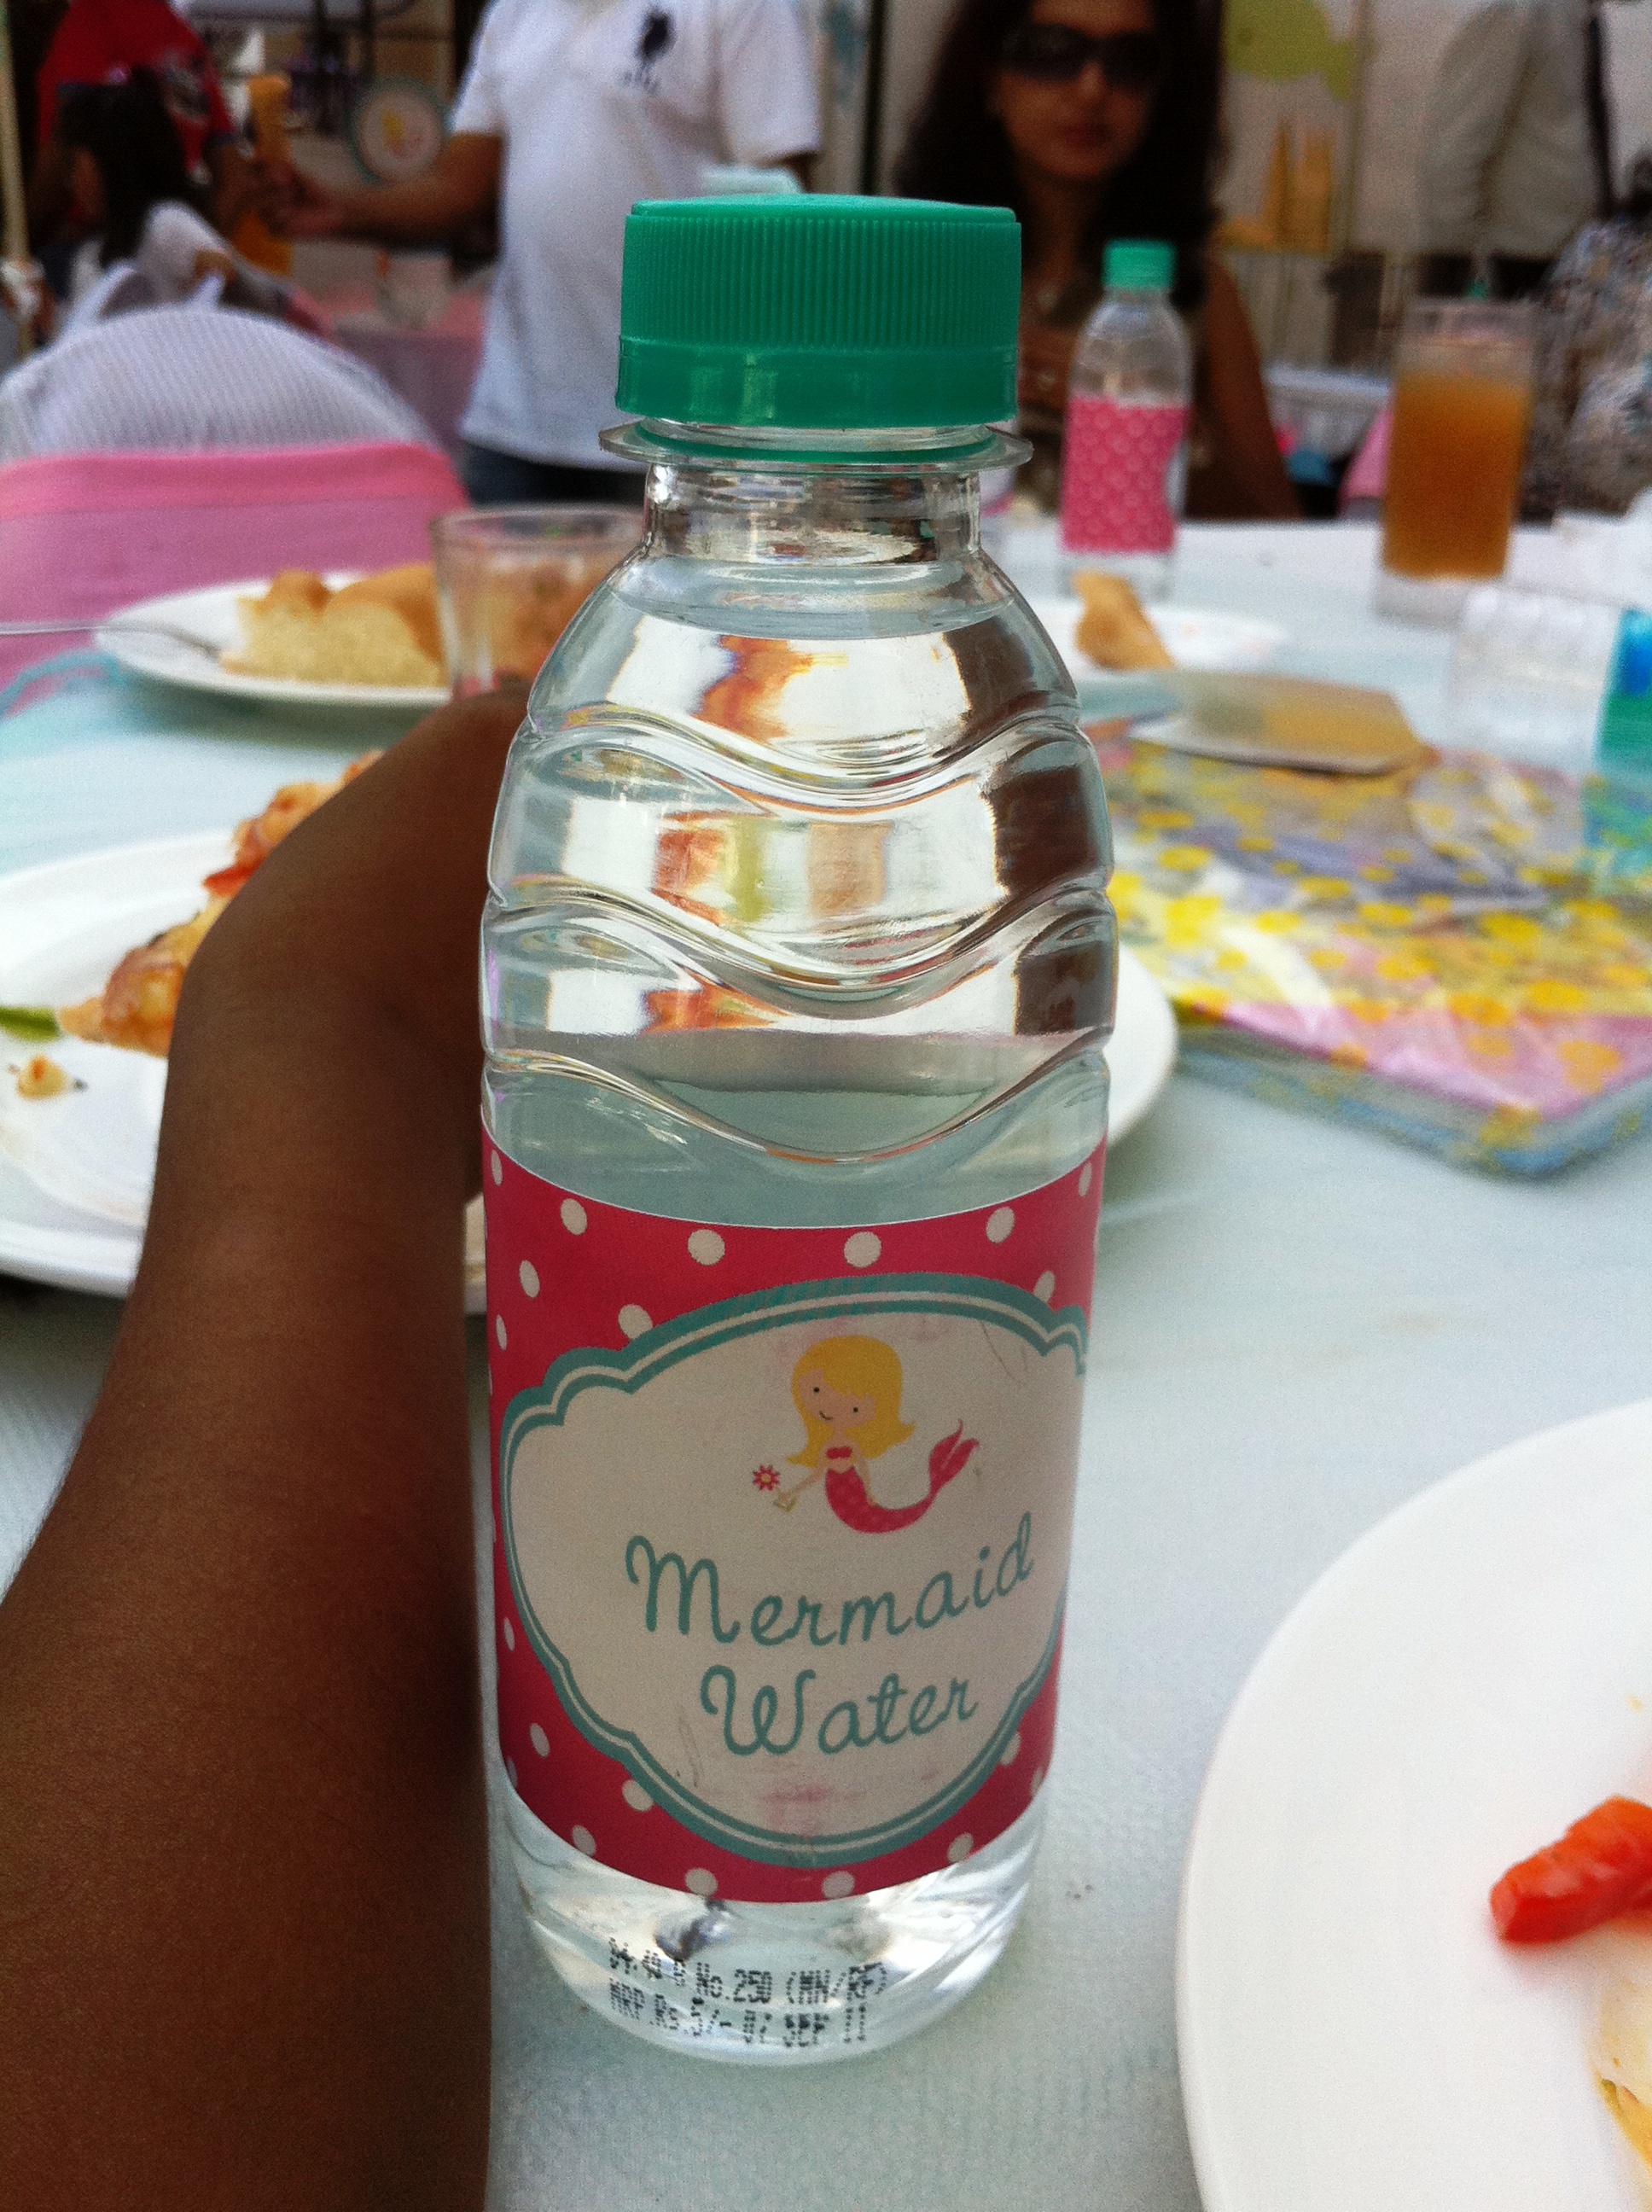 Even the bottled water followed the theme